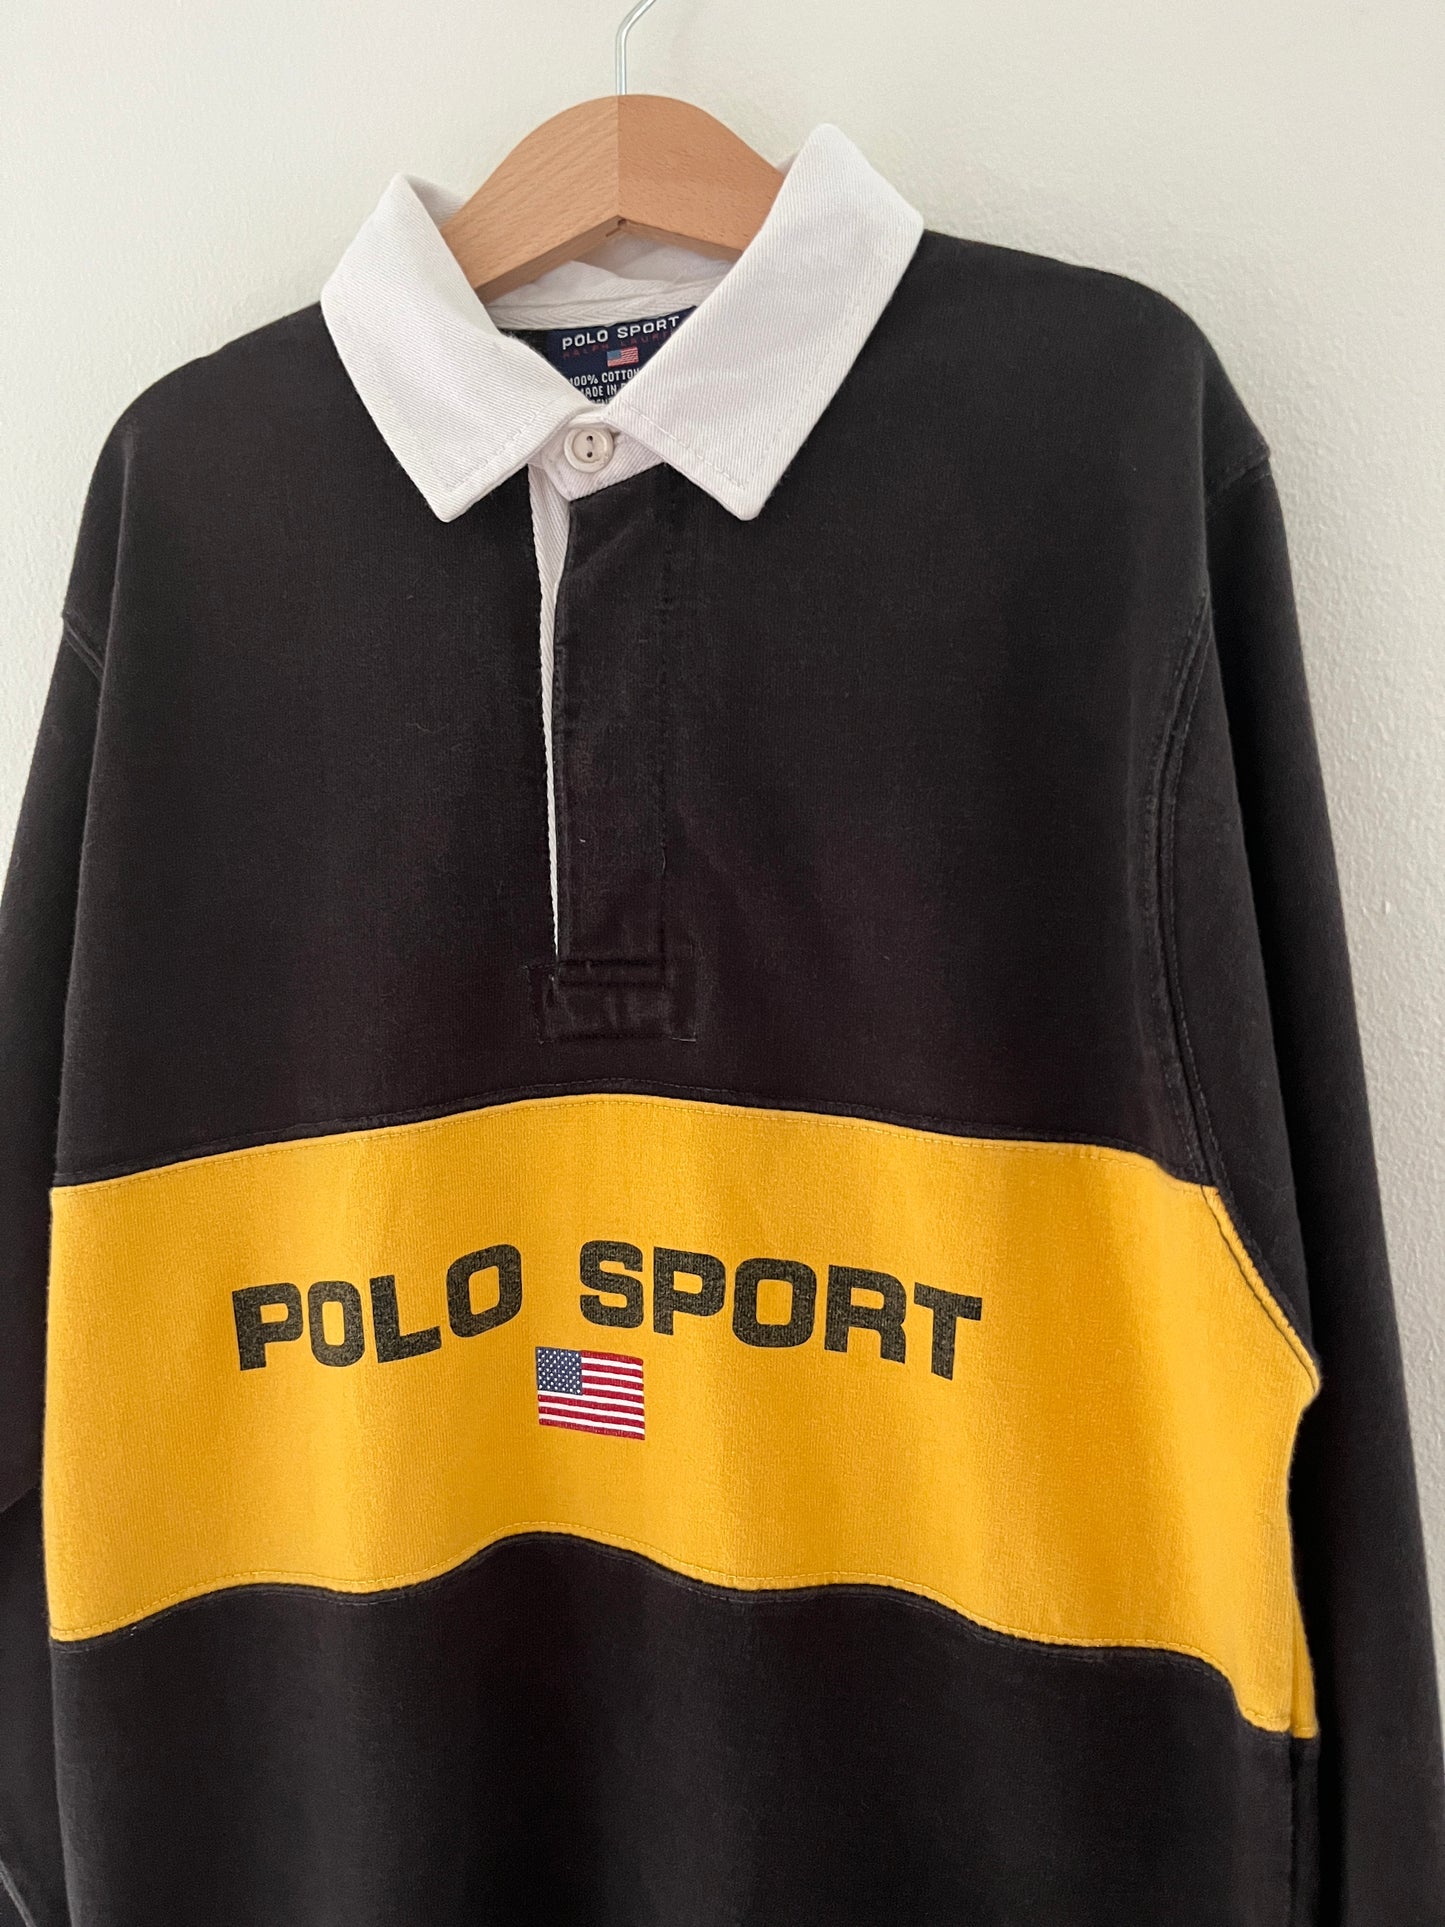 Rugby shirt, 146/152